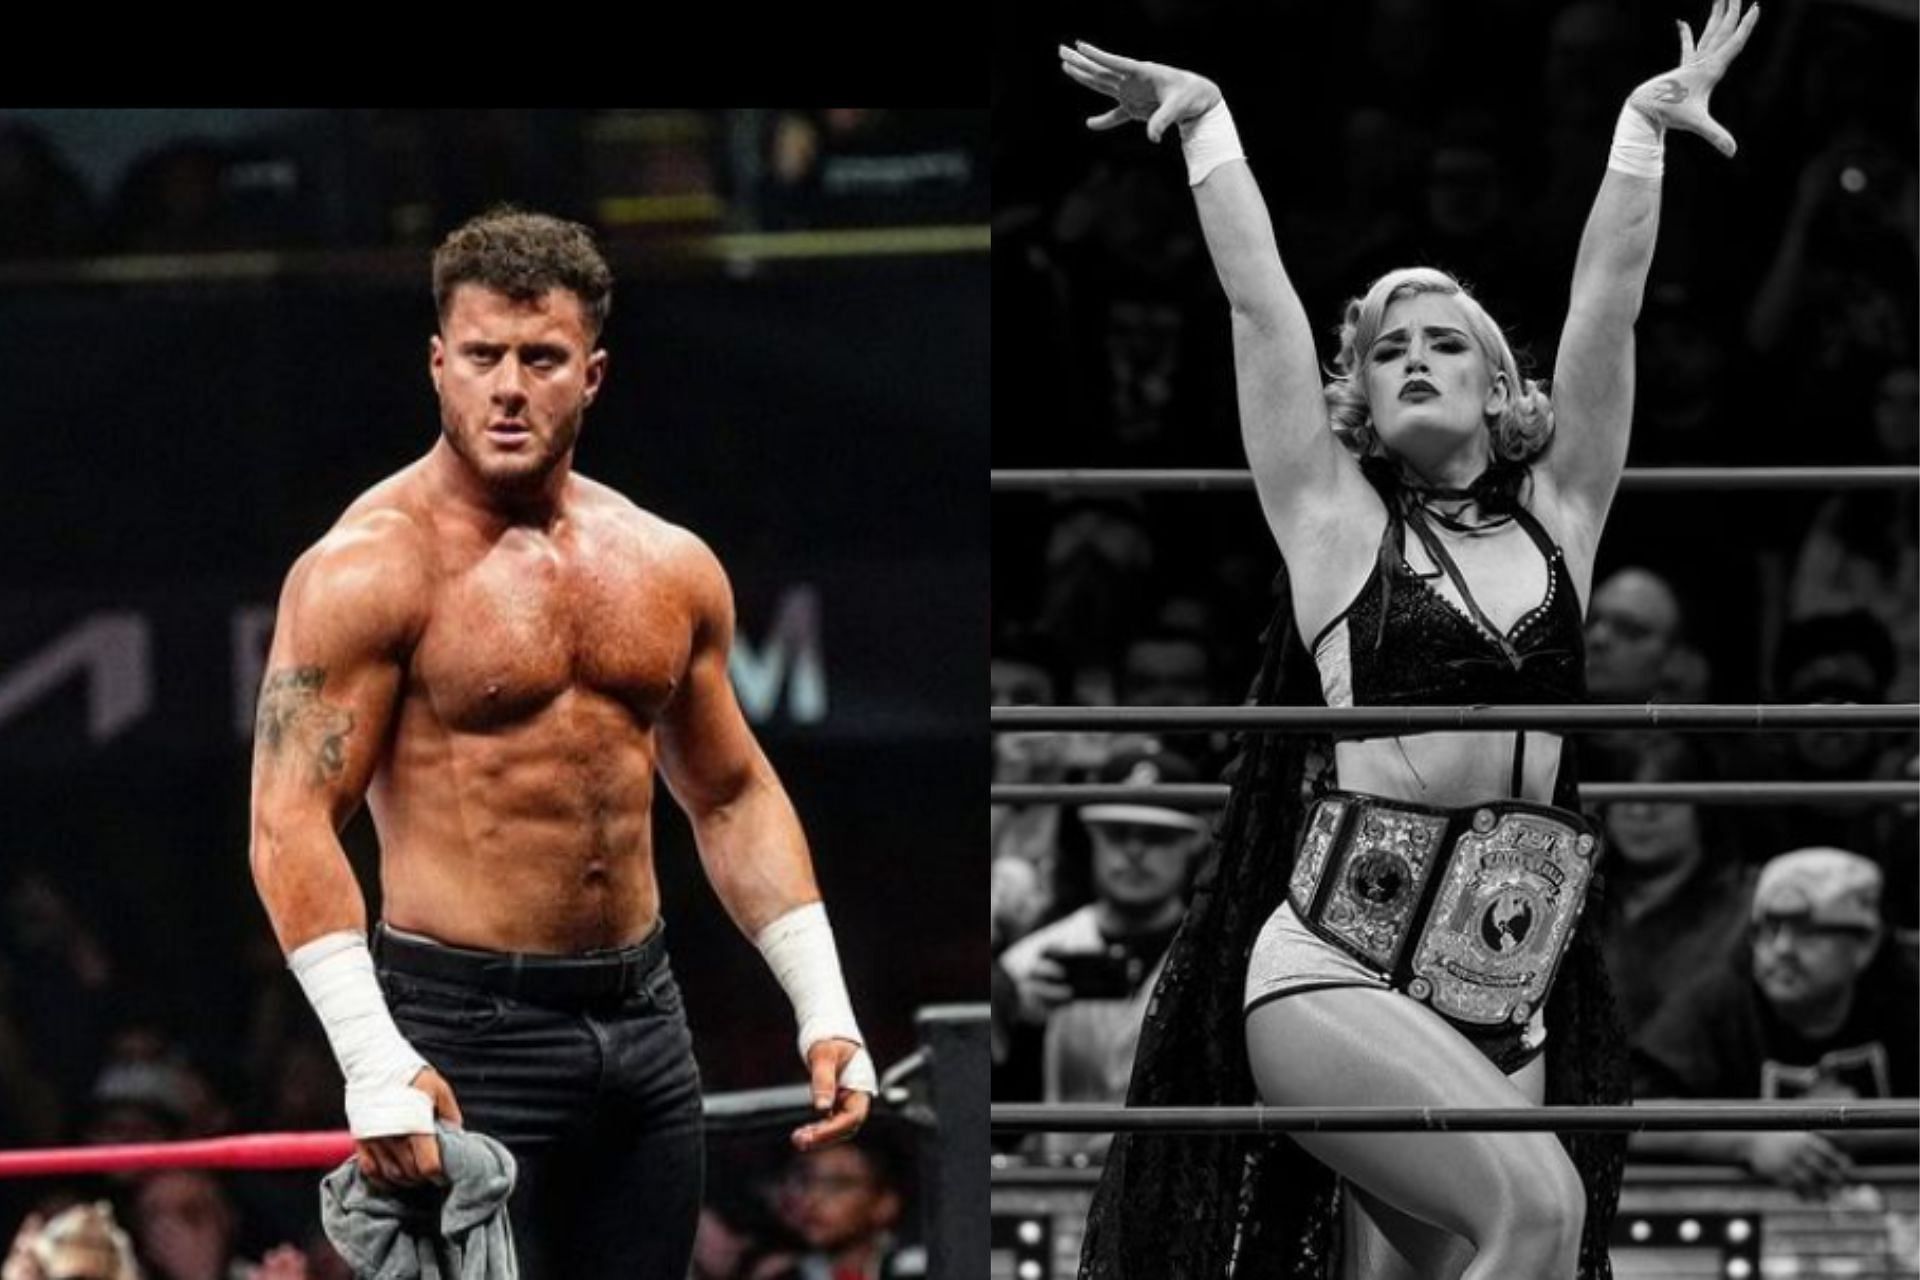 Some bold predictions for the upcoming AEW: Revoluton [Image Credits: Tony Storm and MJF Instagram]